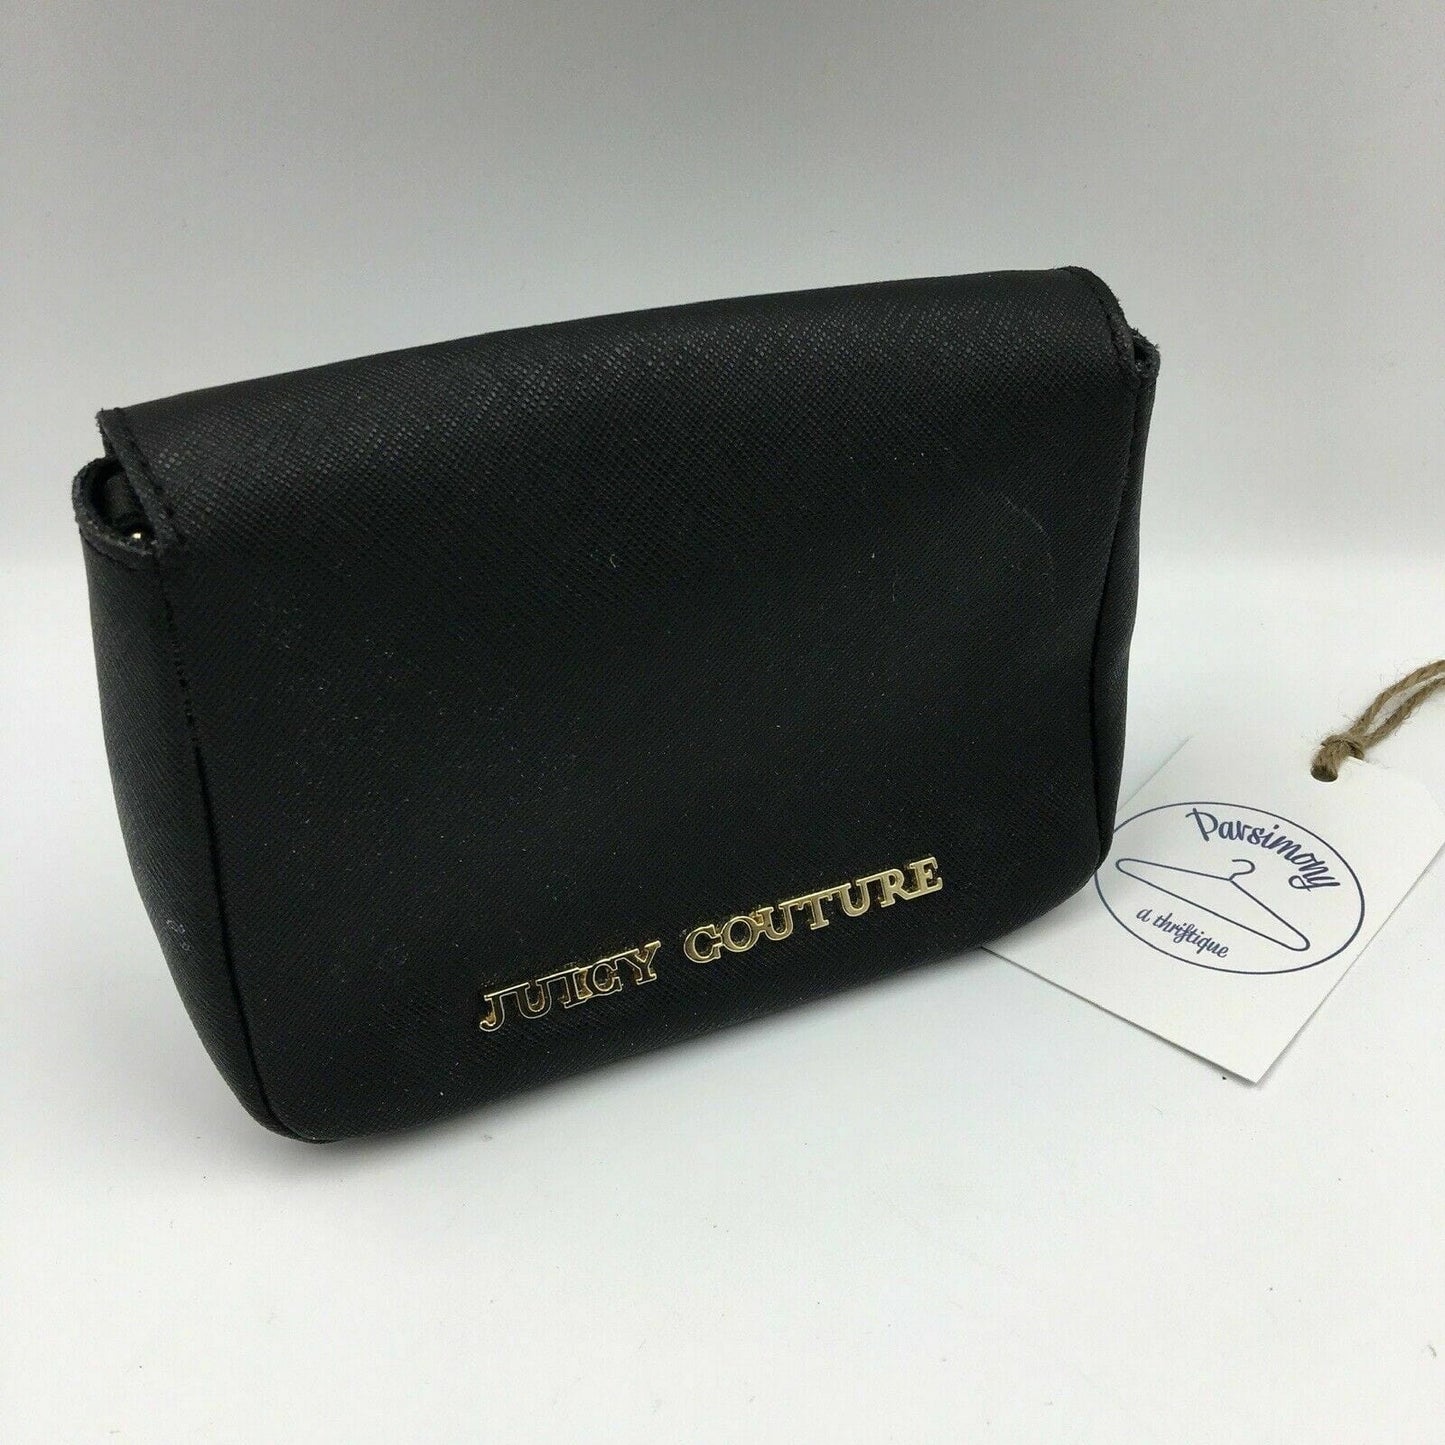 Juicy Couture Black Hatched Leather Bag Purse with Gold Chain Cross Body